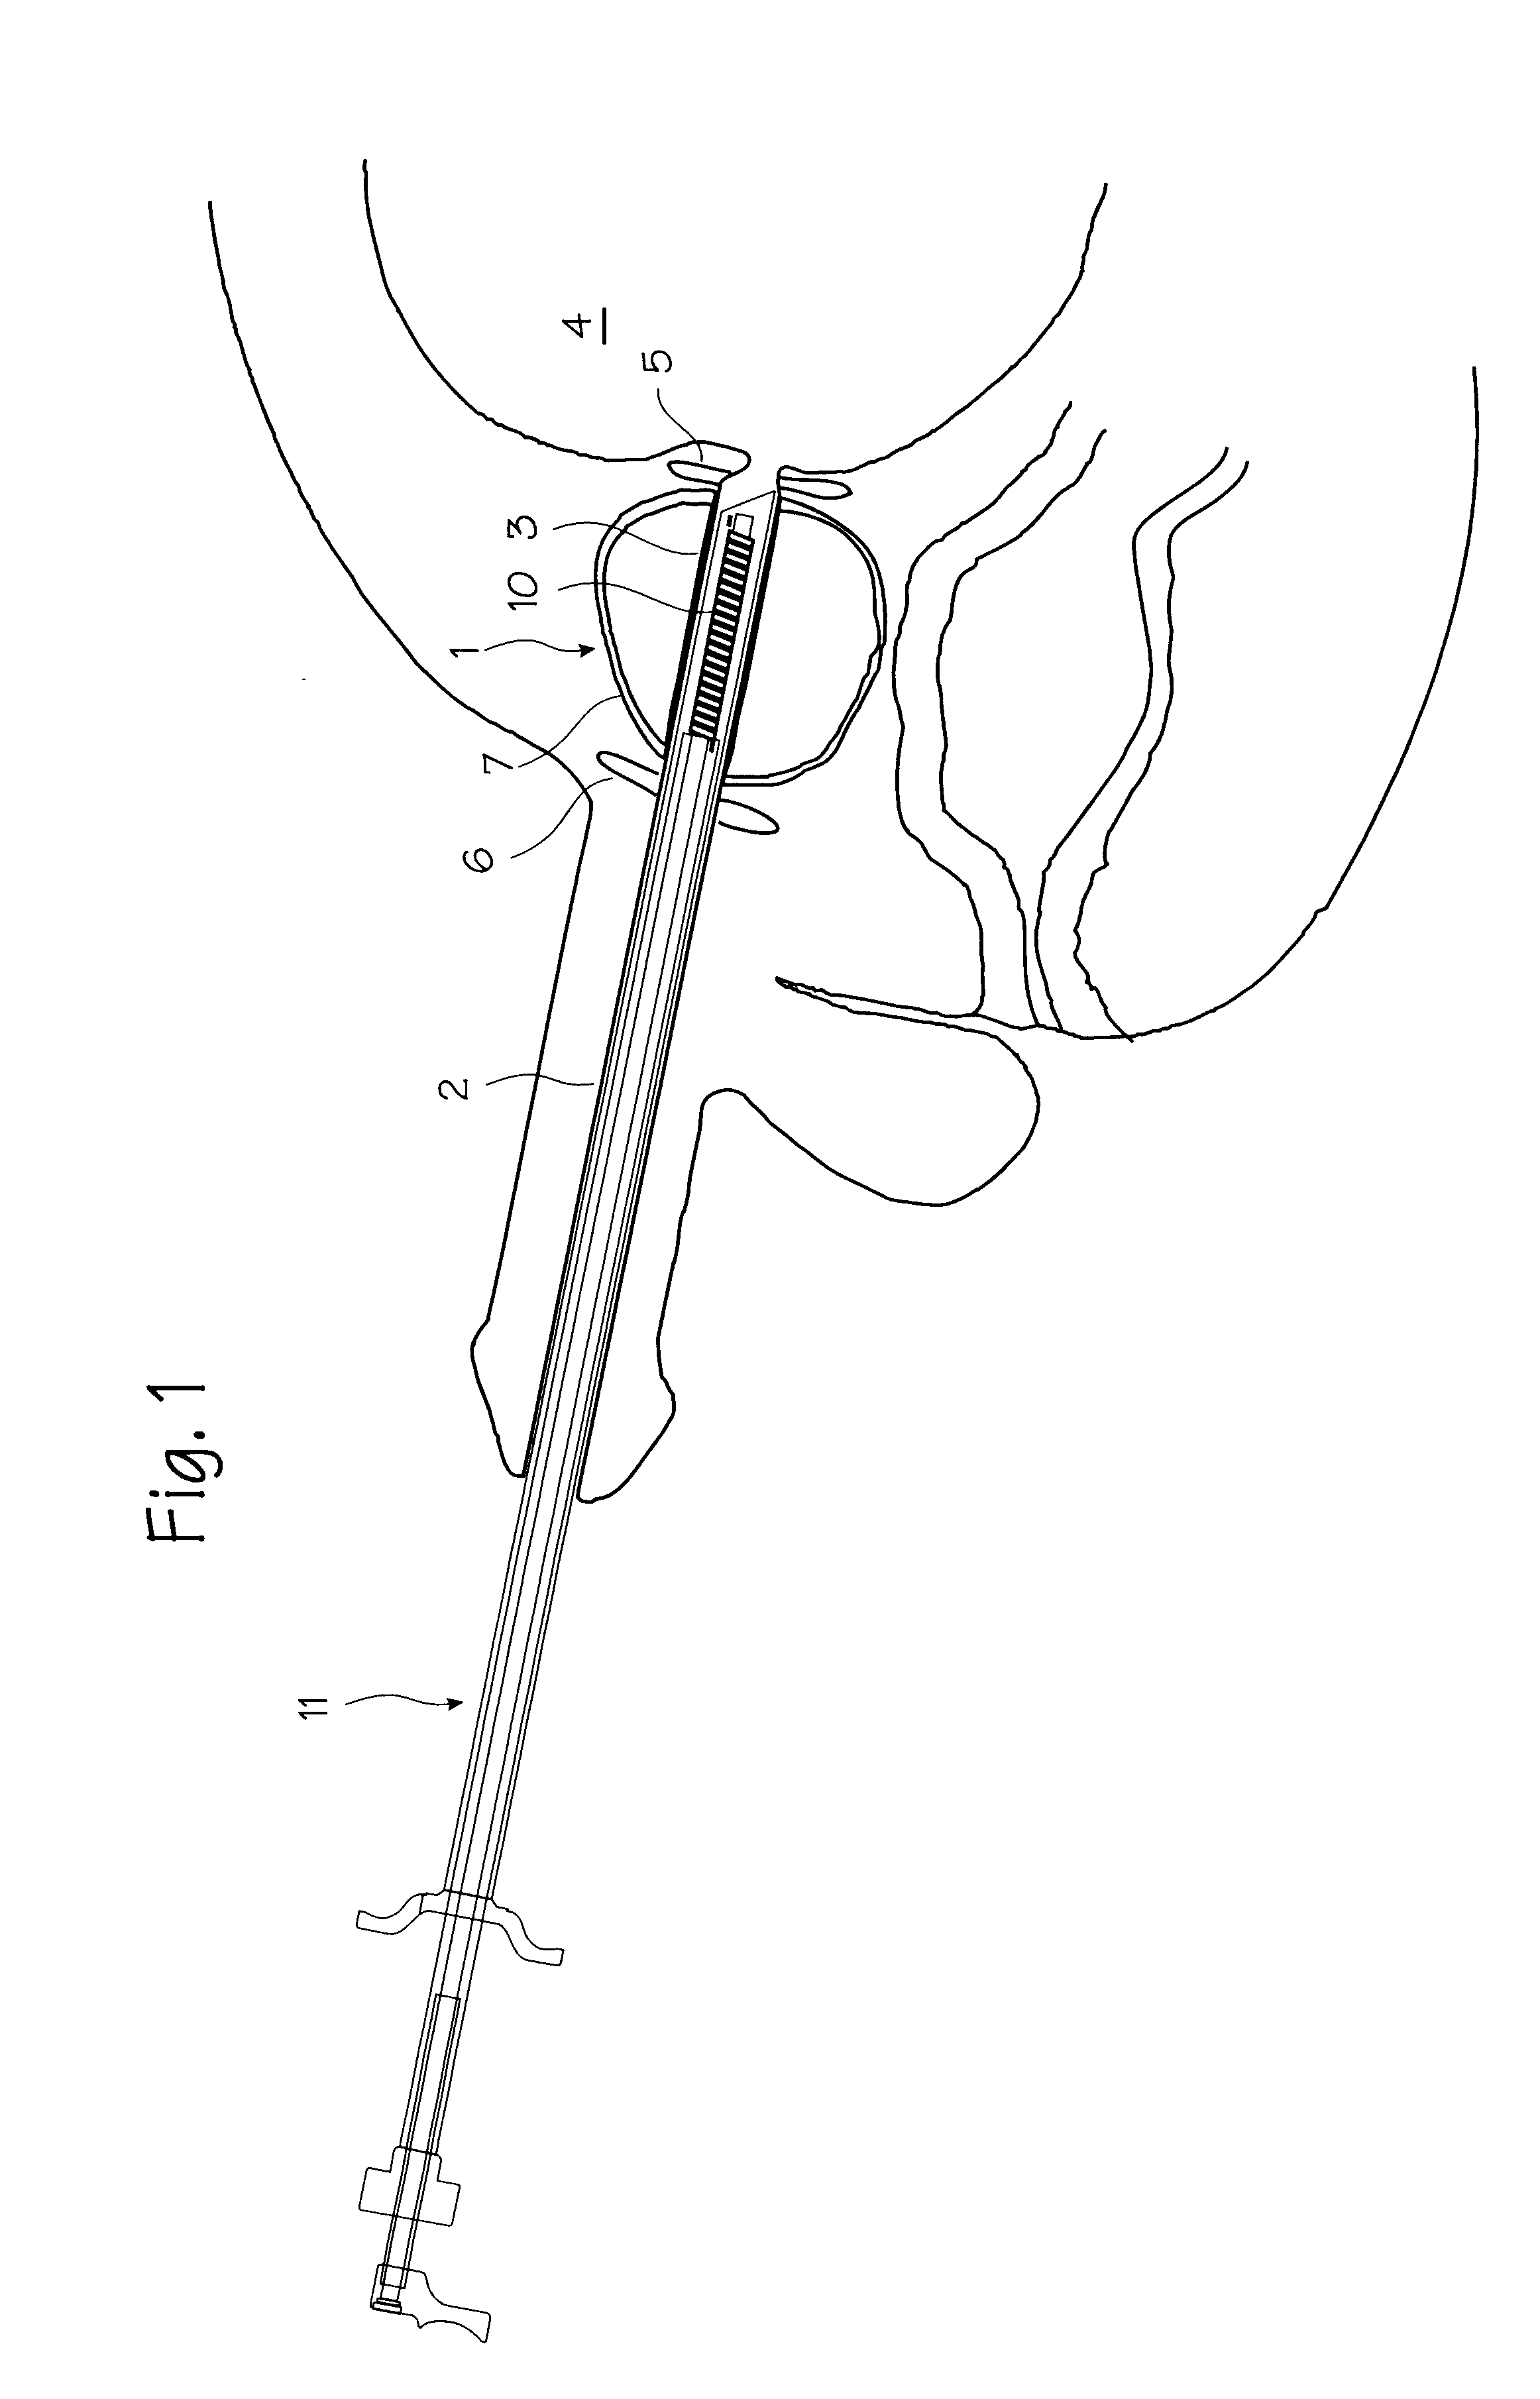 Stent delivery system